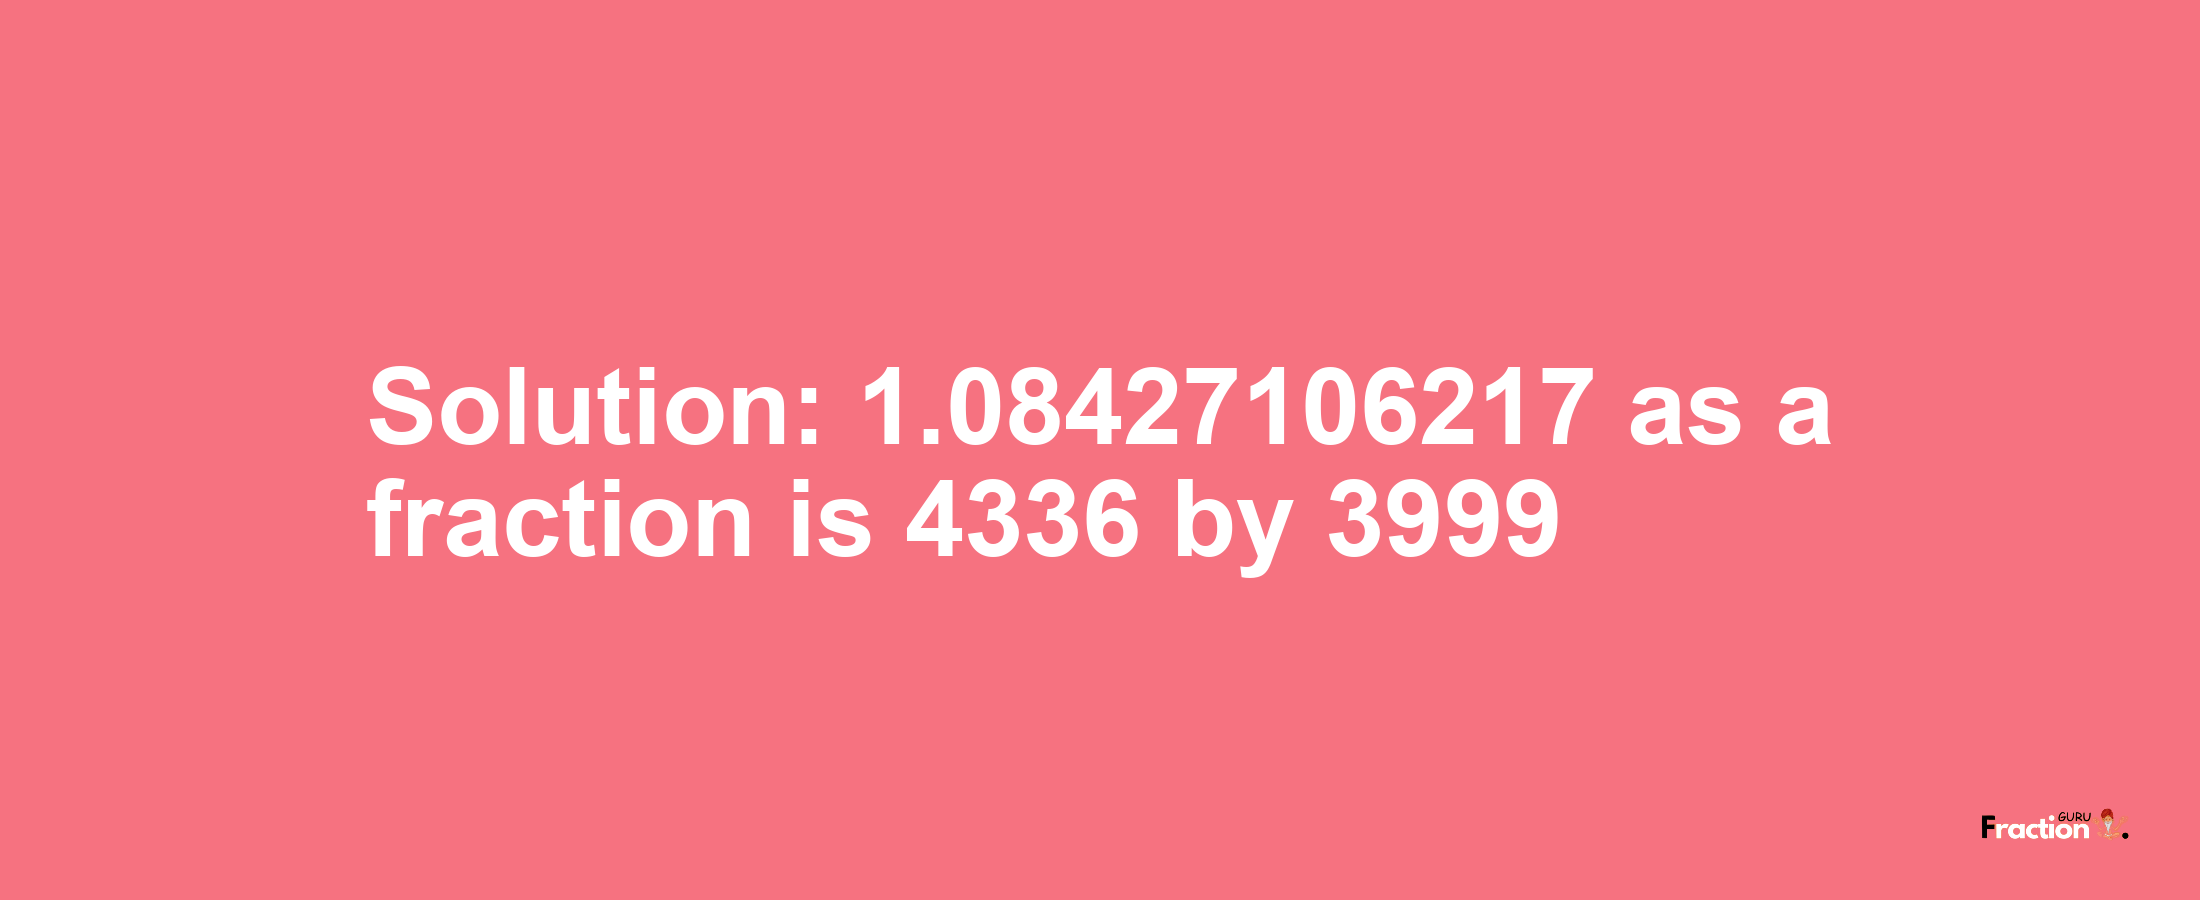 Solution:1.08427106217 as a fraction is 4336/3999